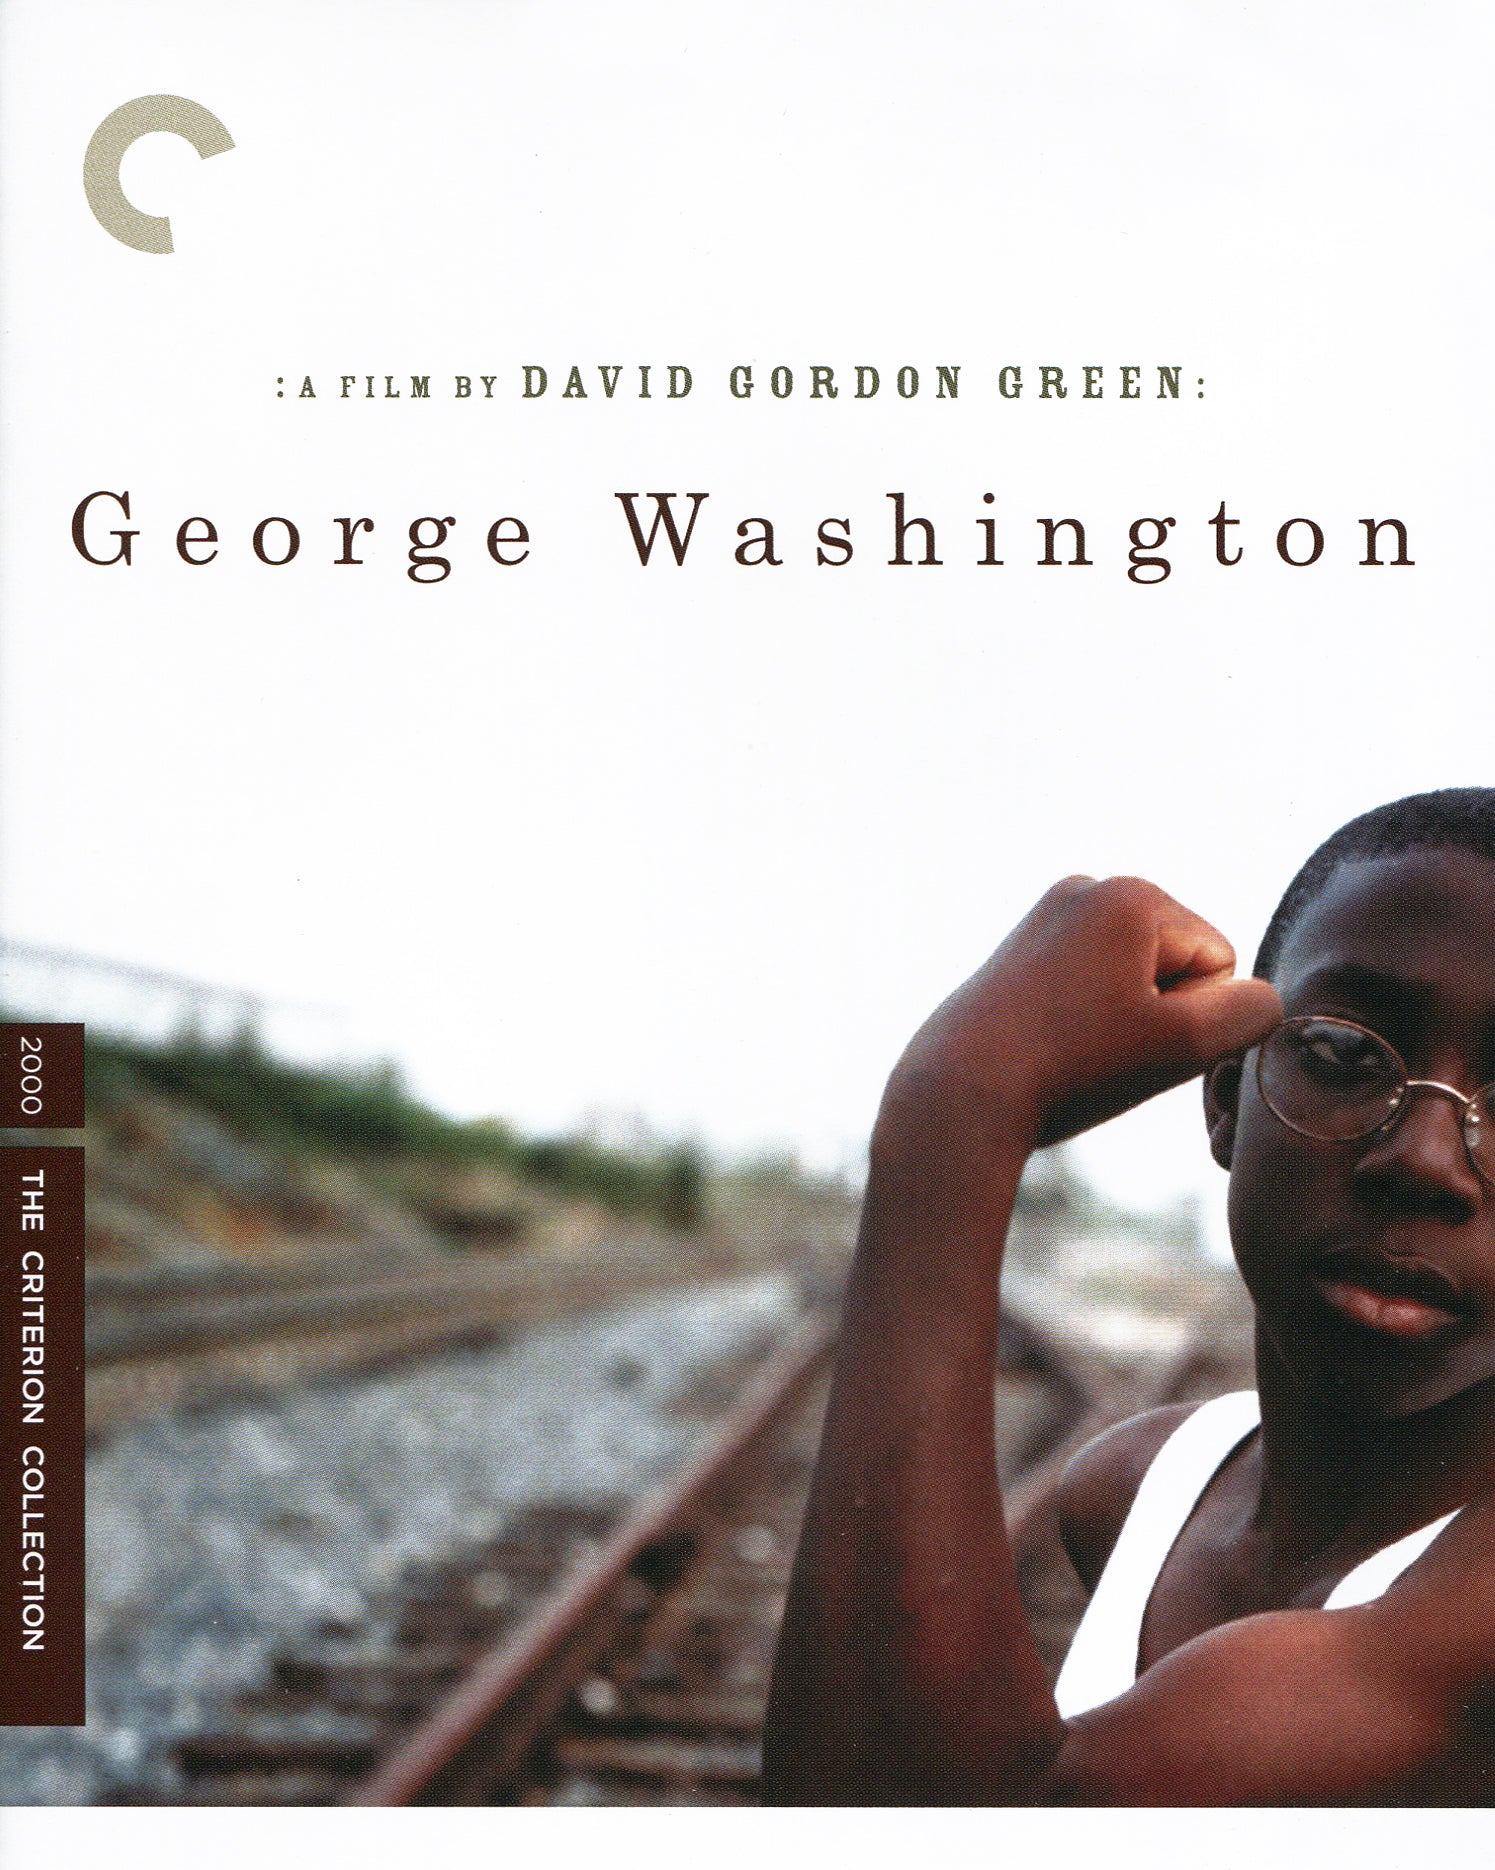 George Washington [Criterion Collection] [Blu-ray] cover art